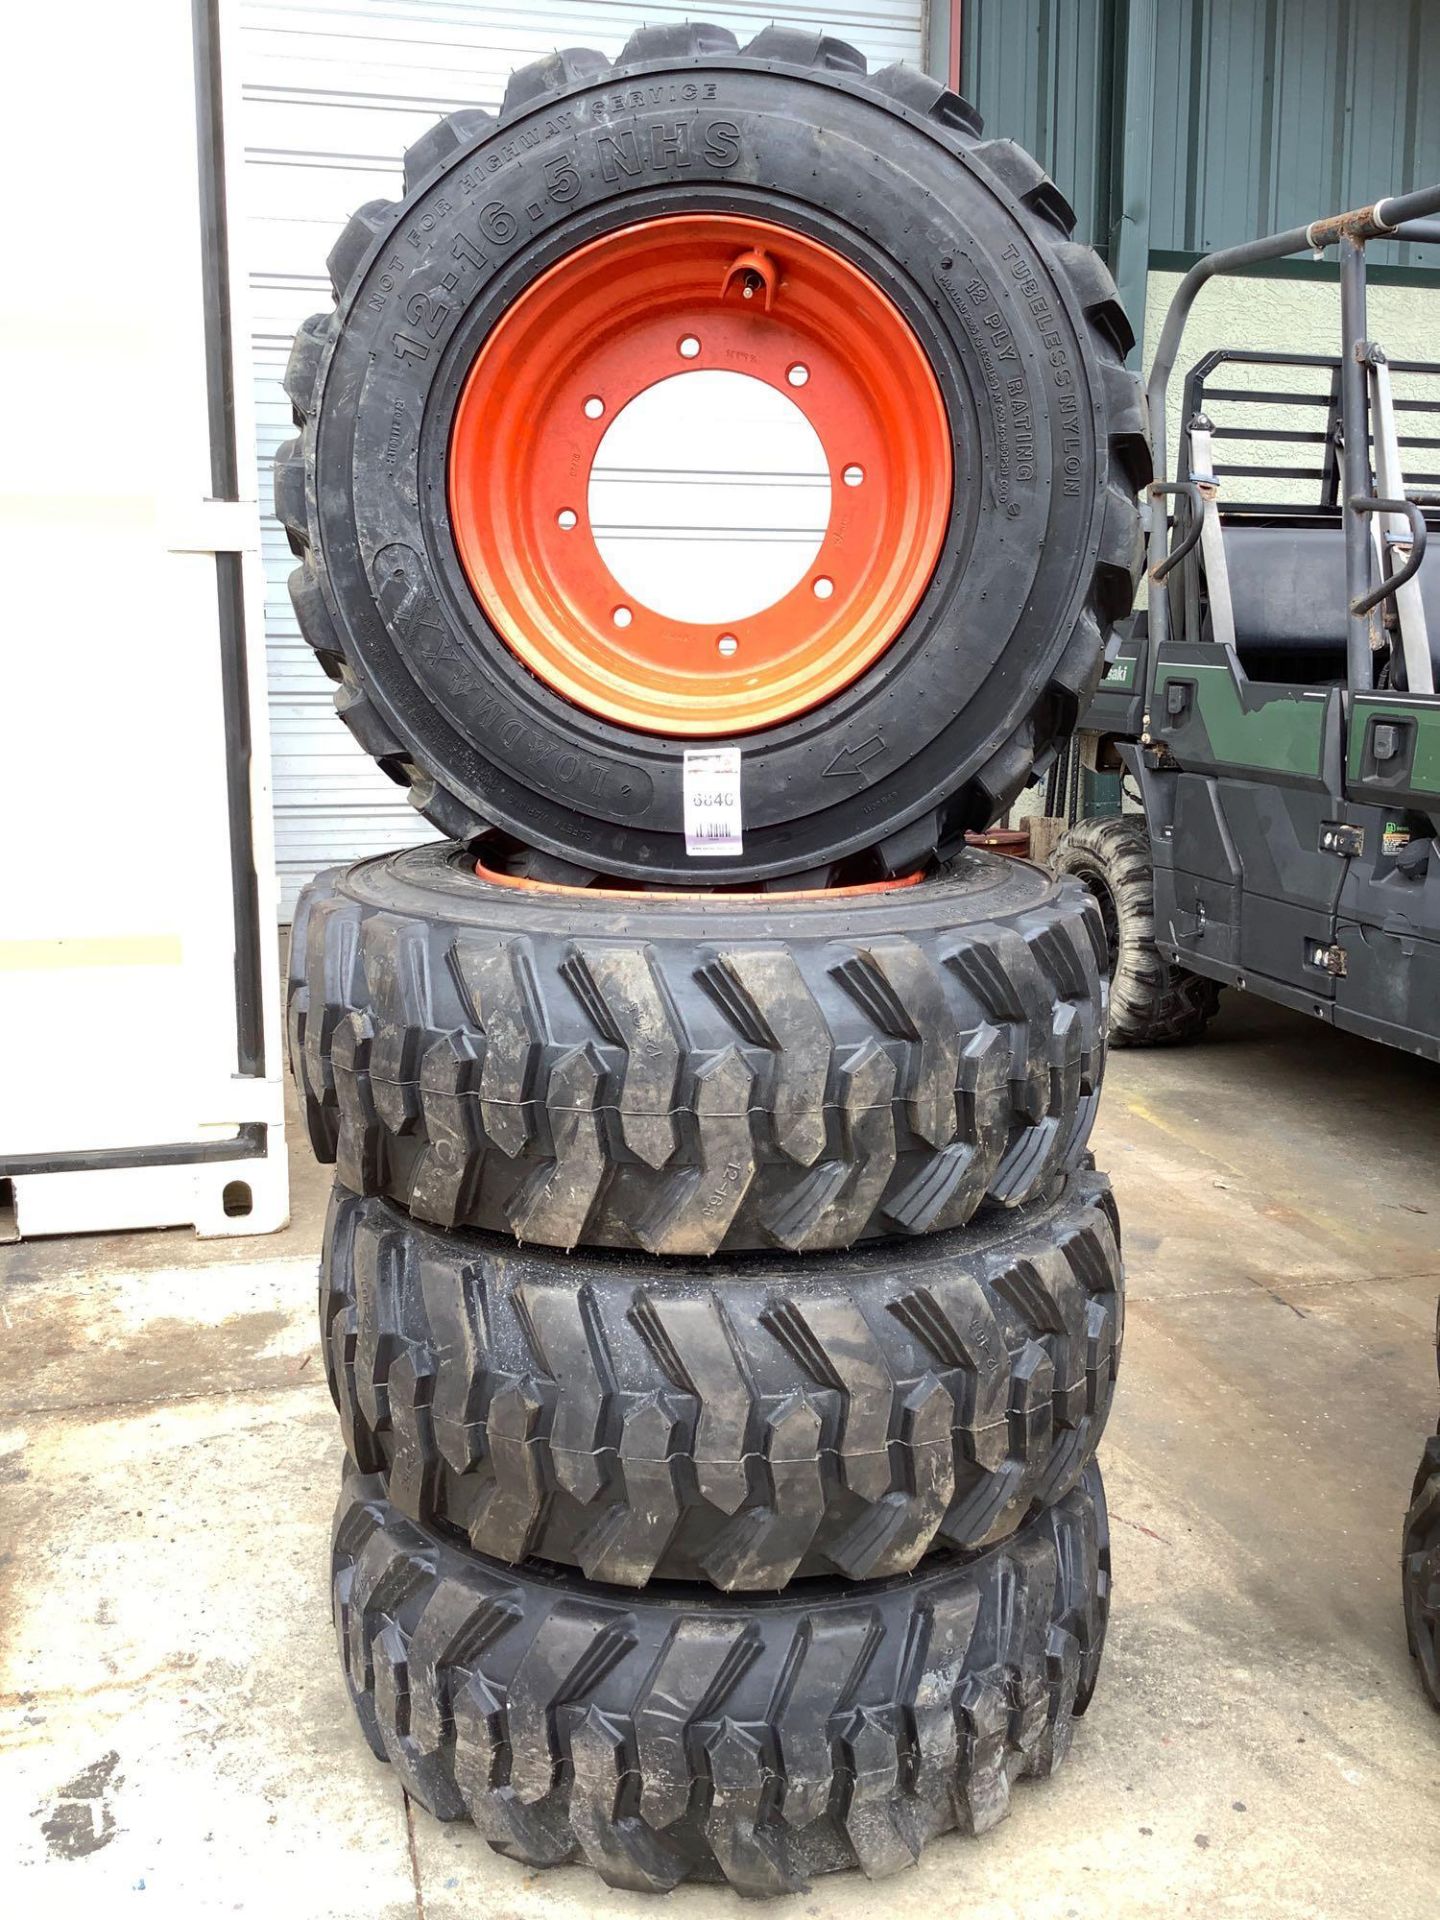 ( 4 ) LOADMAXX 12-16.5 N.H.S TIRES FOR SKID STEER, 8 LUG HOLES , 12 PLY RATING